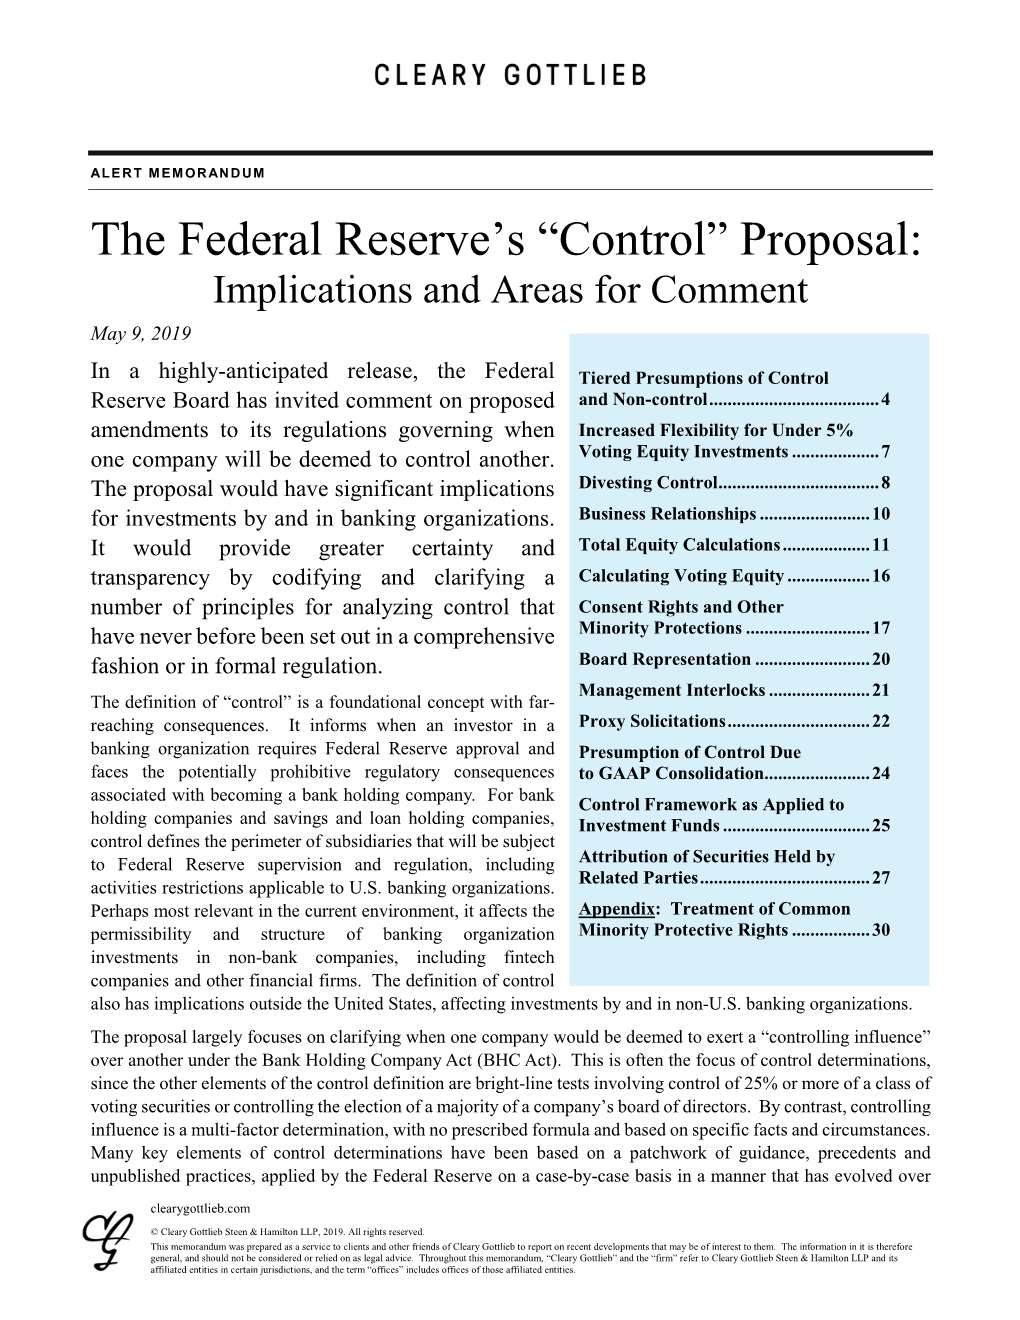 The Federal Reserve's “Control” Proposal